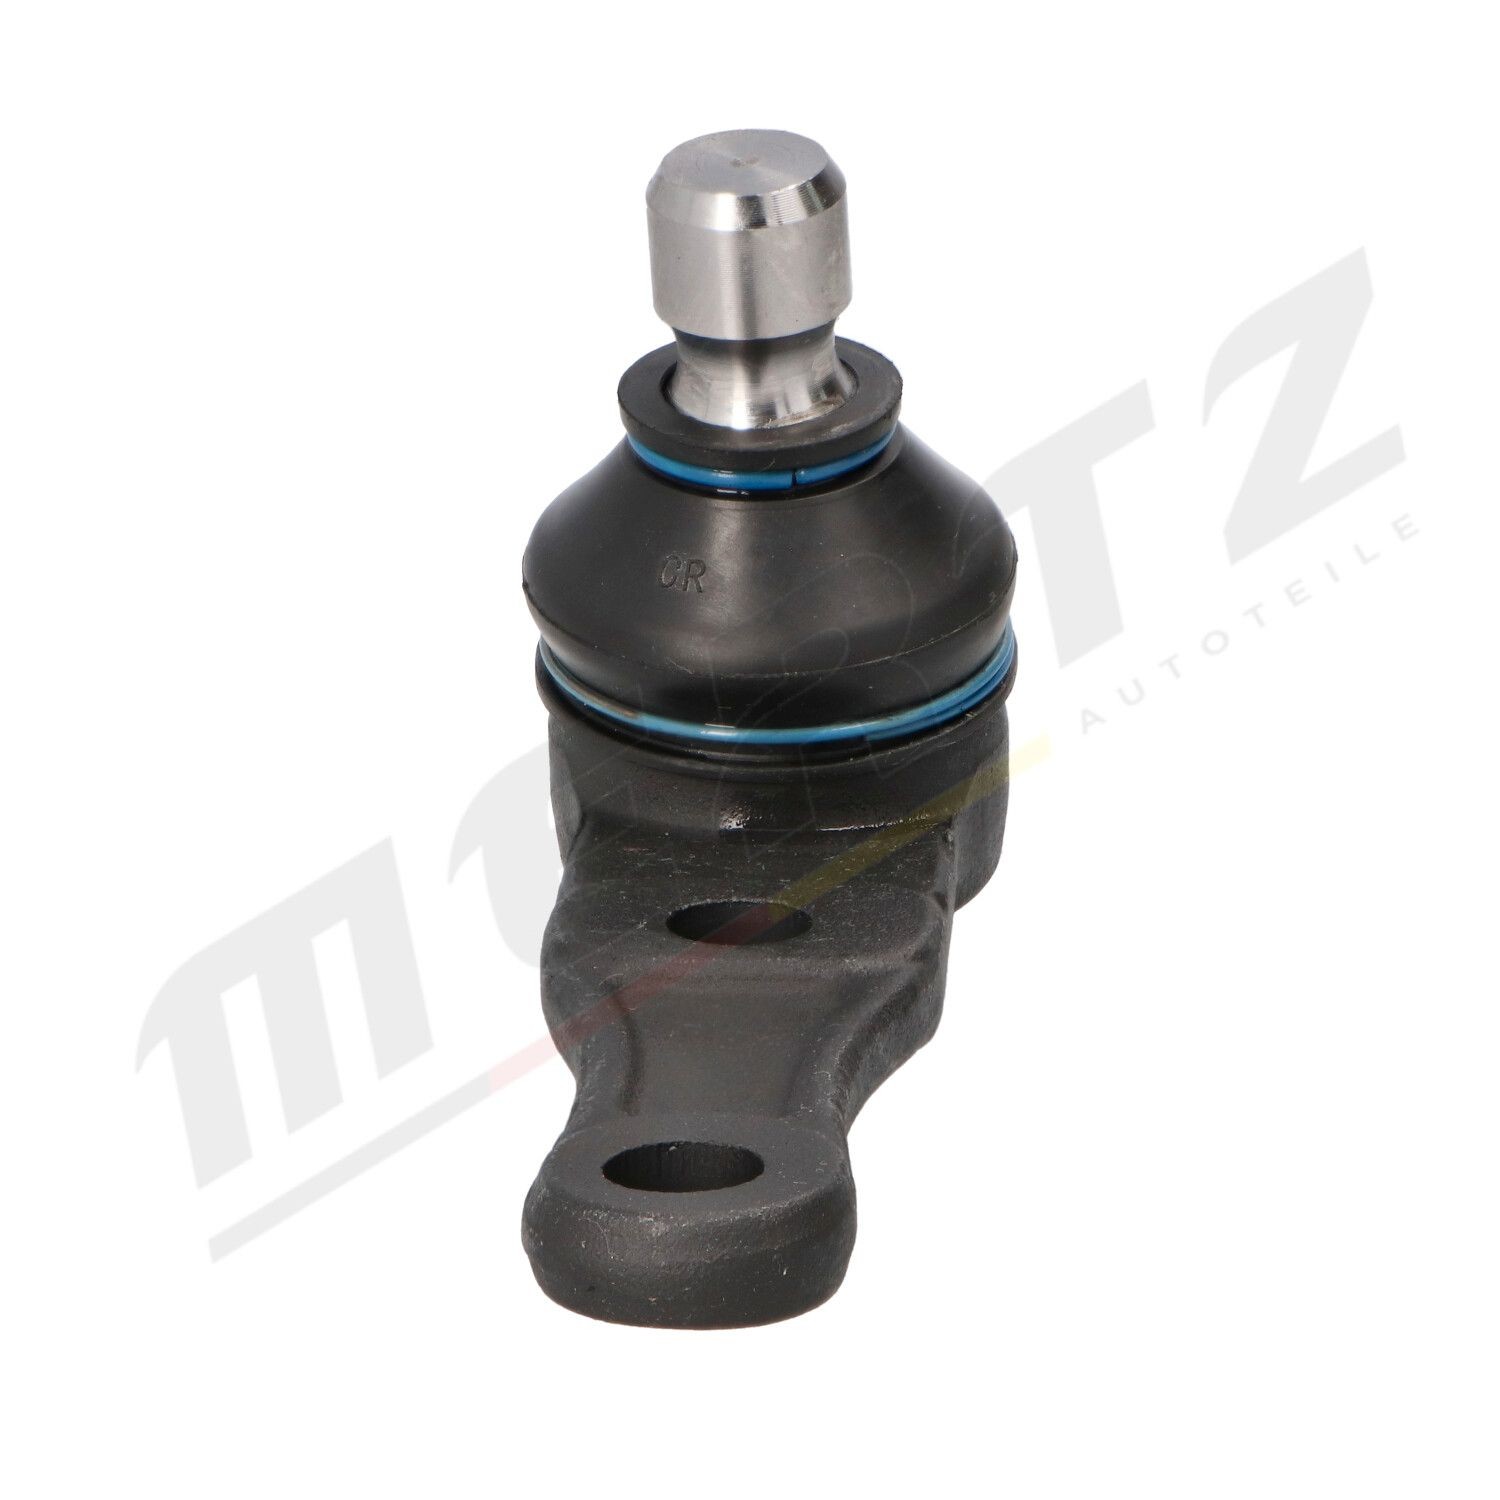 MS1029 Ball joint suspension arm MERTZ M-S1029 review and test